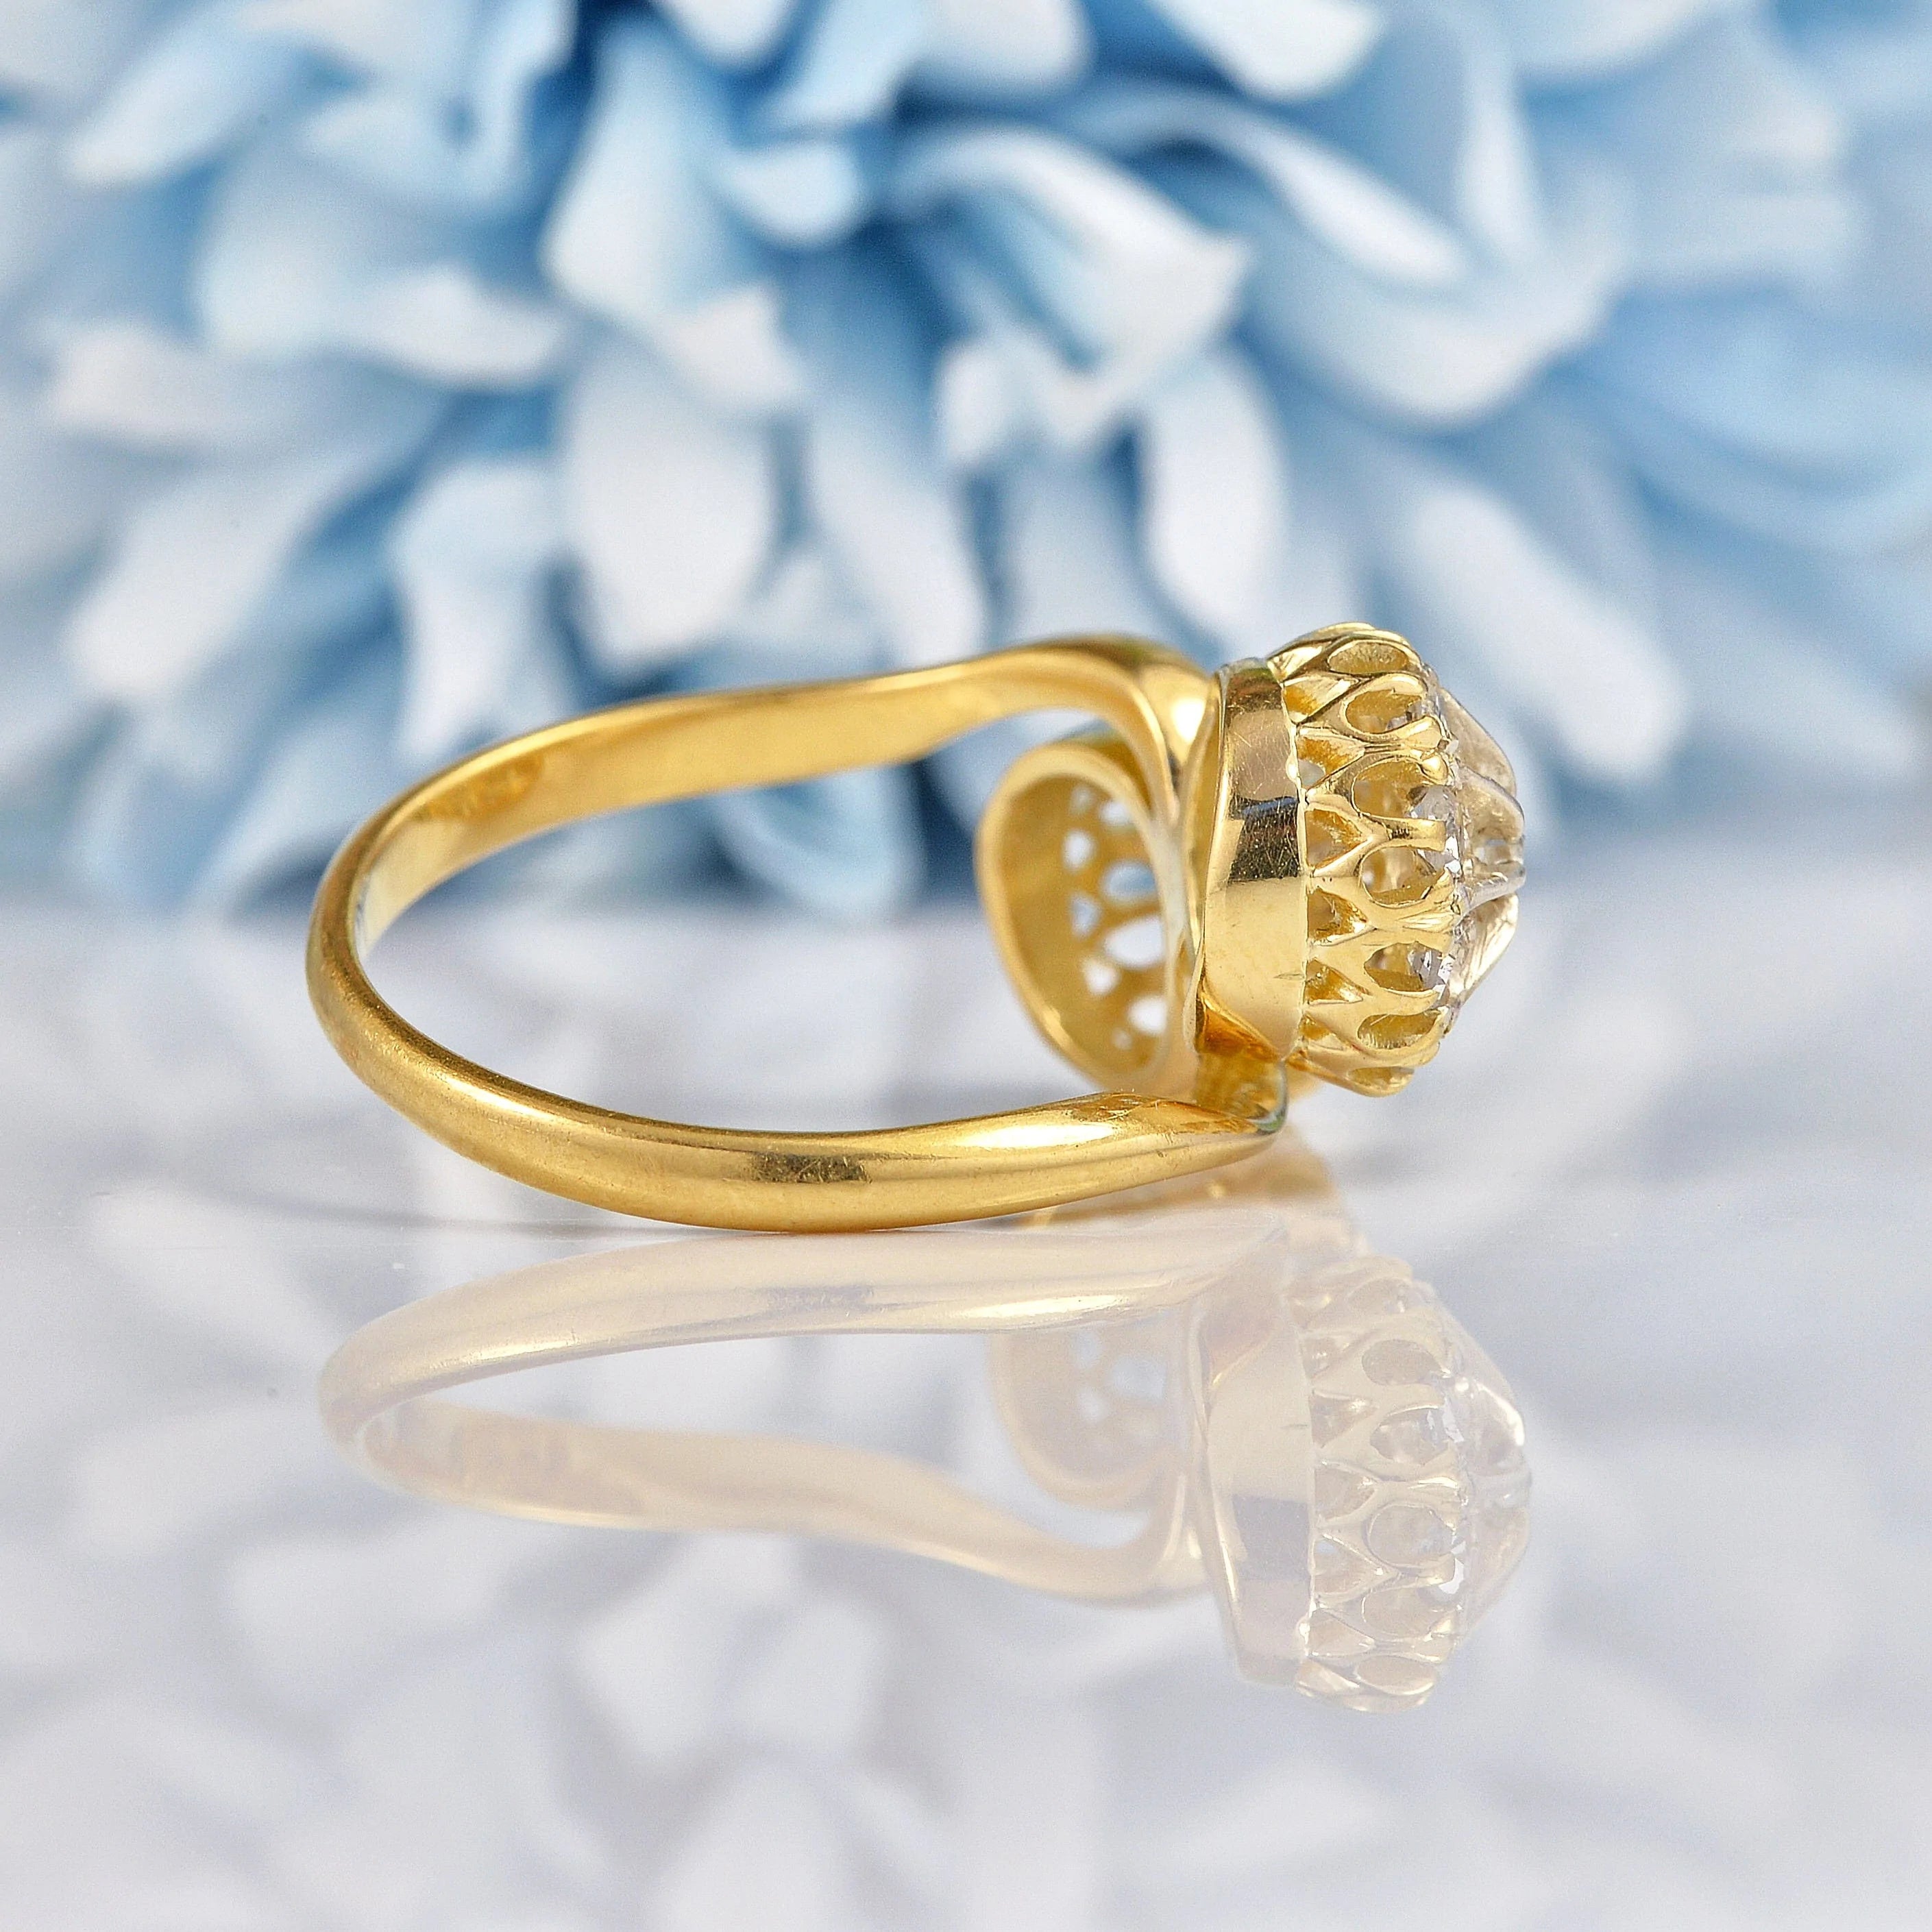 Ellibelle Jewellery Antique Edwardian Diamond 18ct Gold Double Daisy Cluster Ring